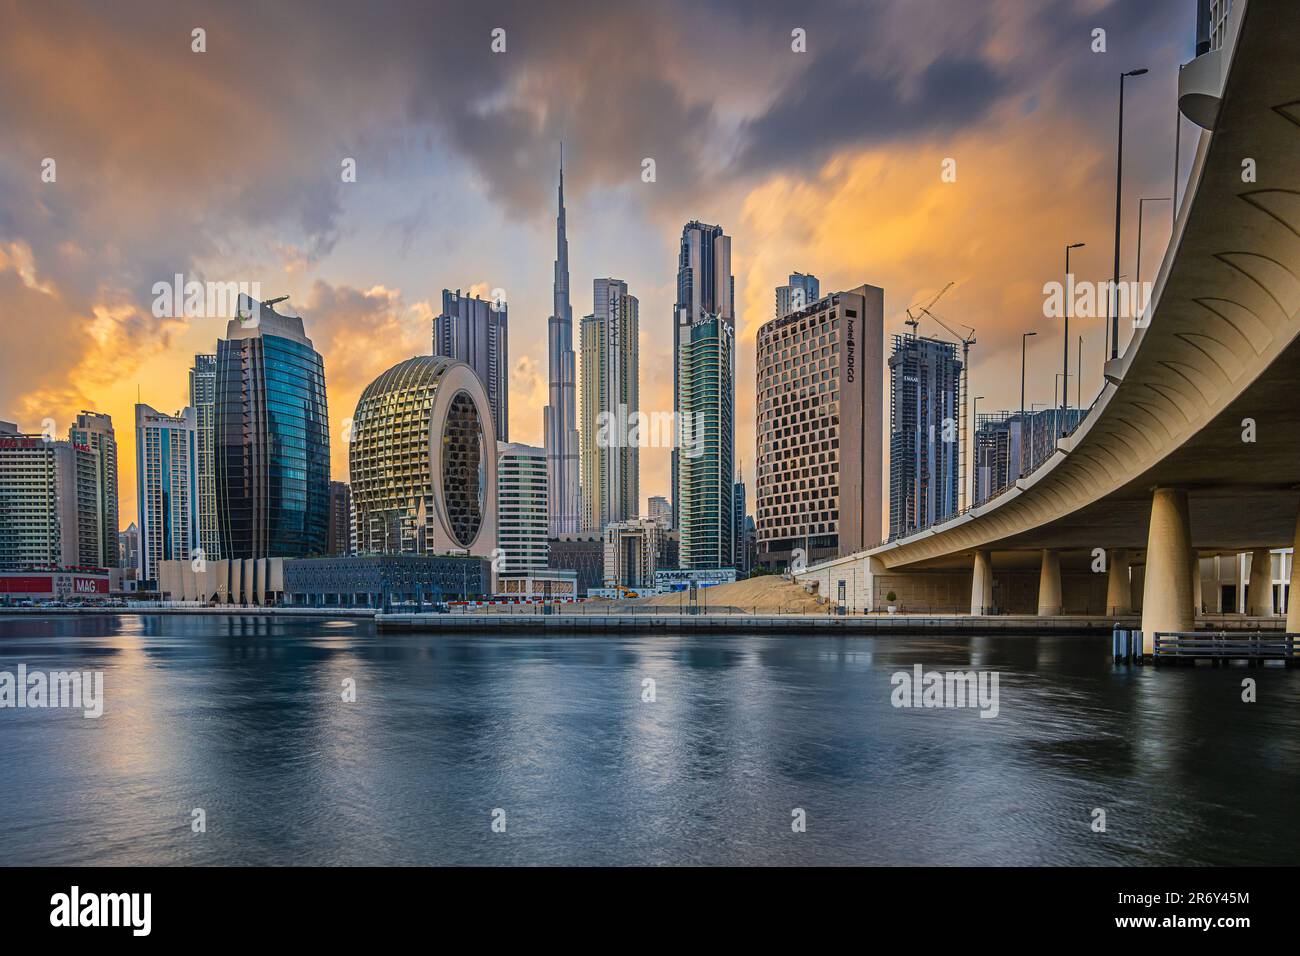 Evening mood in Dubai. Sunset with the city skyline in Emirates. Cloudy skies with skyscrapers overlooking Burj Khalifa. Glazed facade of skyscrapers. Stock Photo